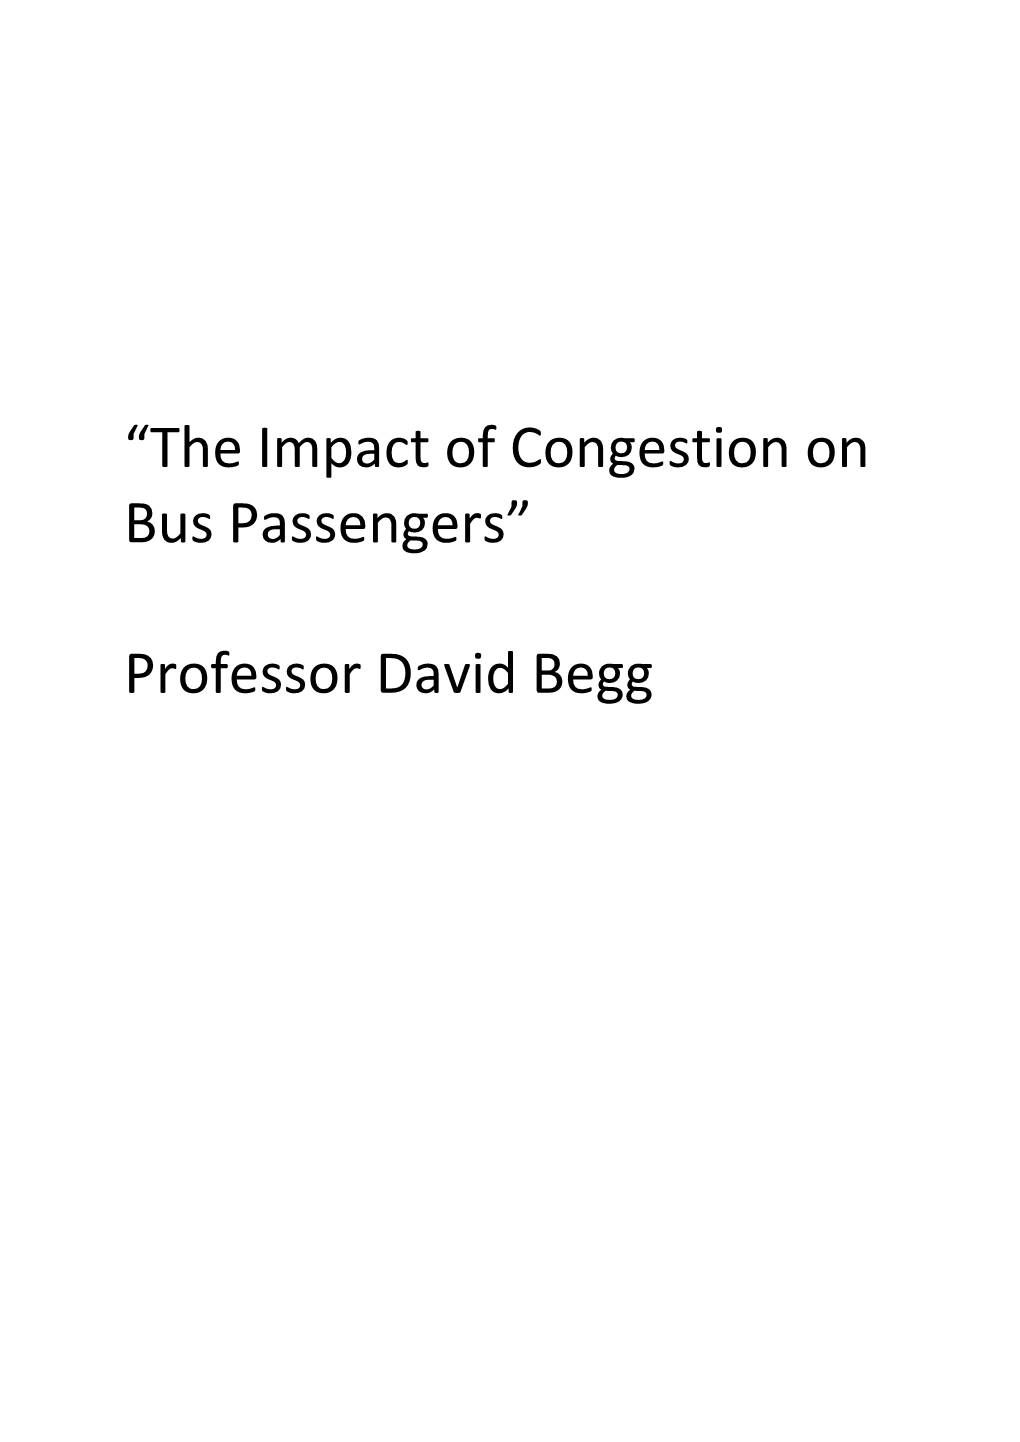 The Impact of Congestion on Bus Passengers”